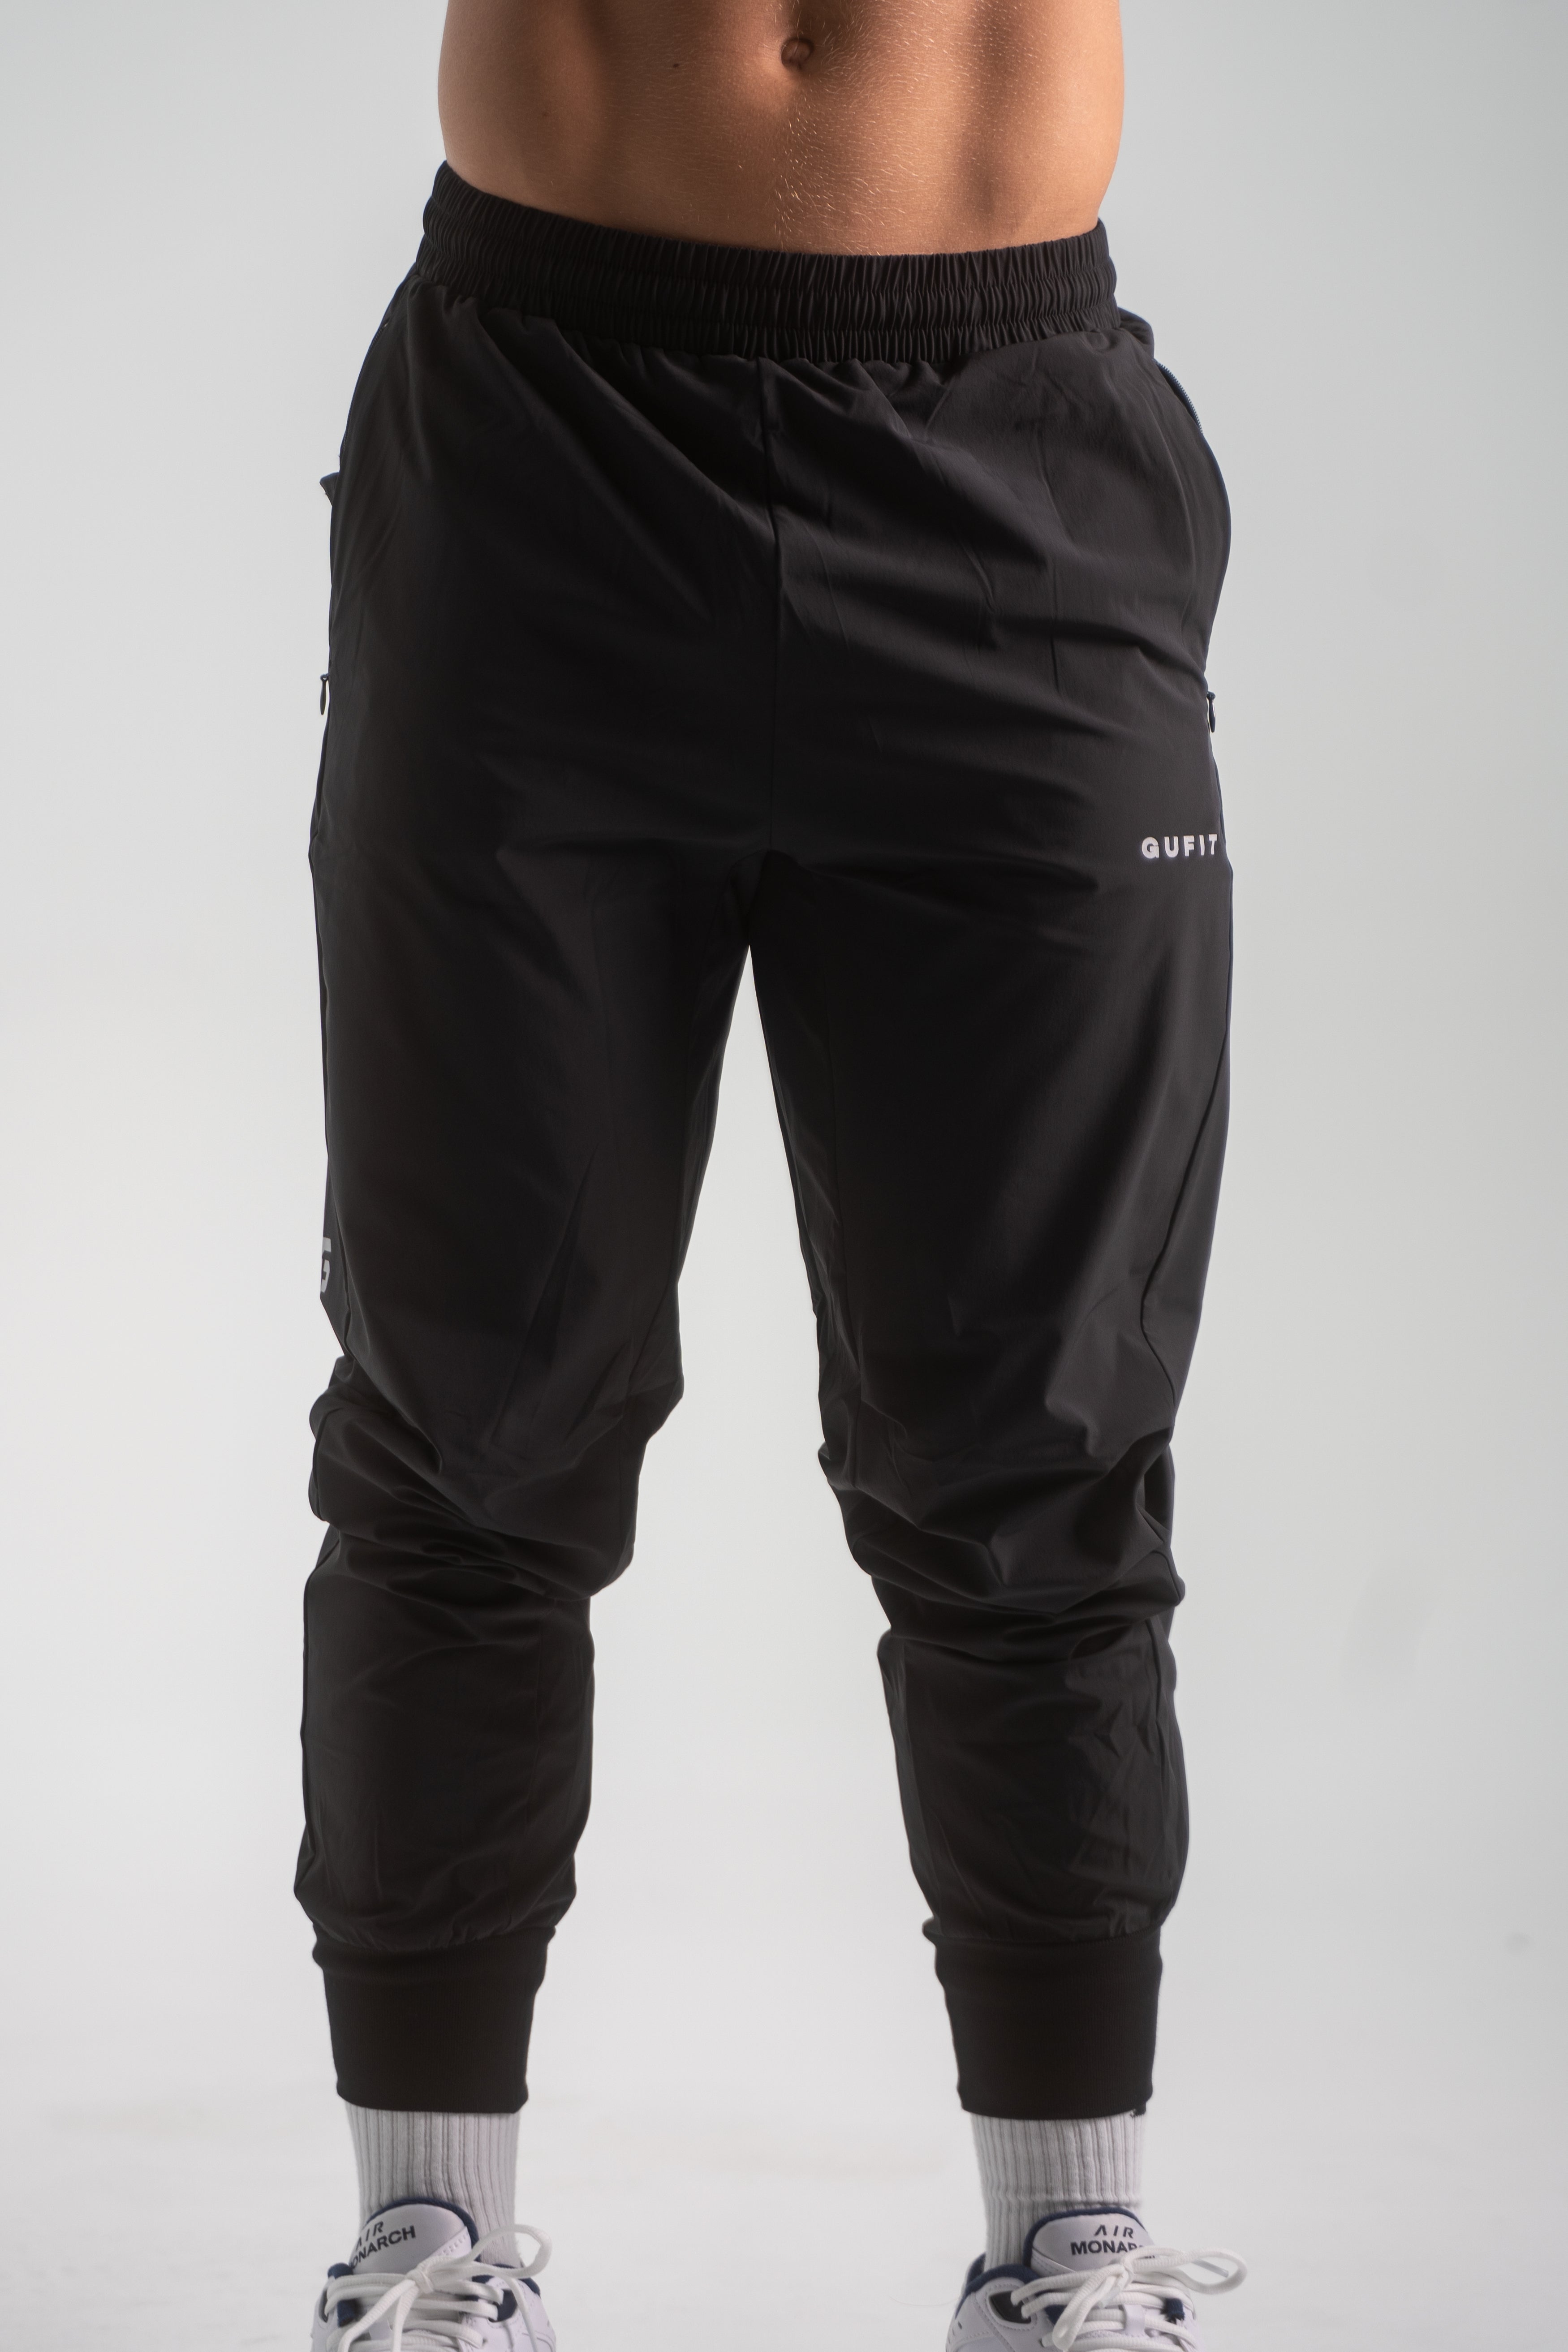 ONYX Tapered Jogger - Limelight Teamwear